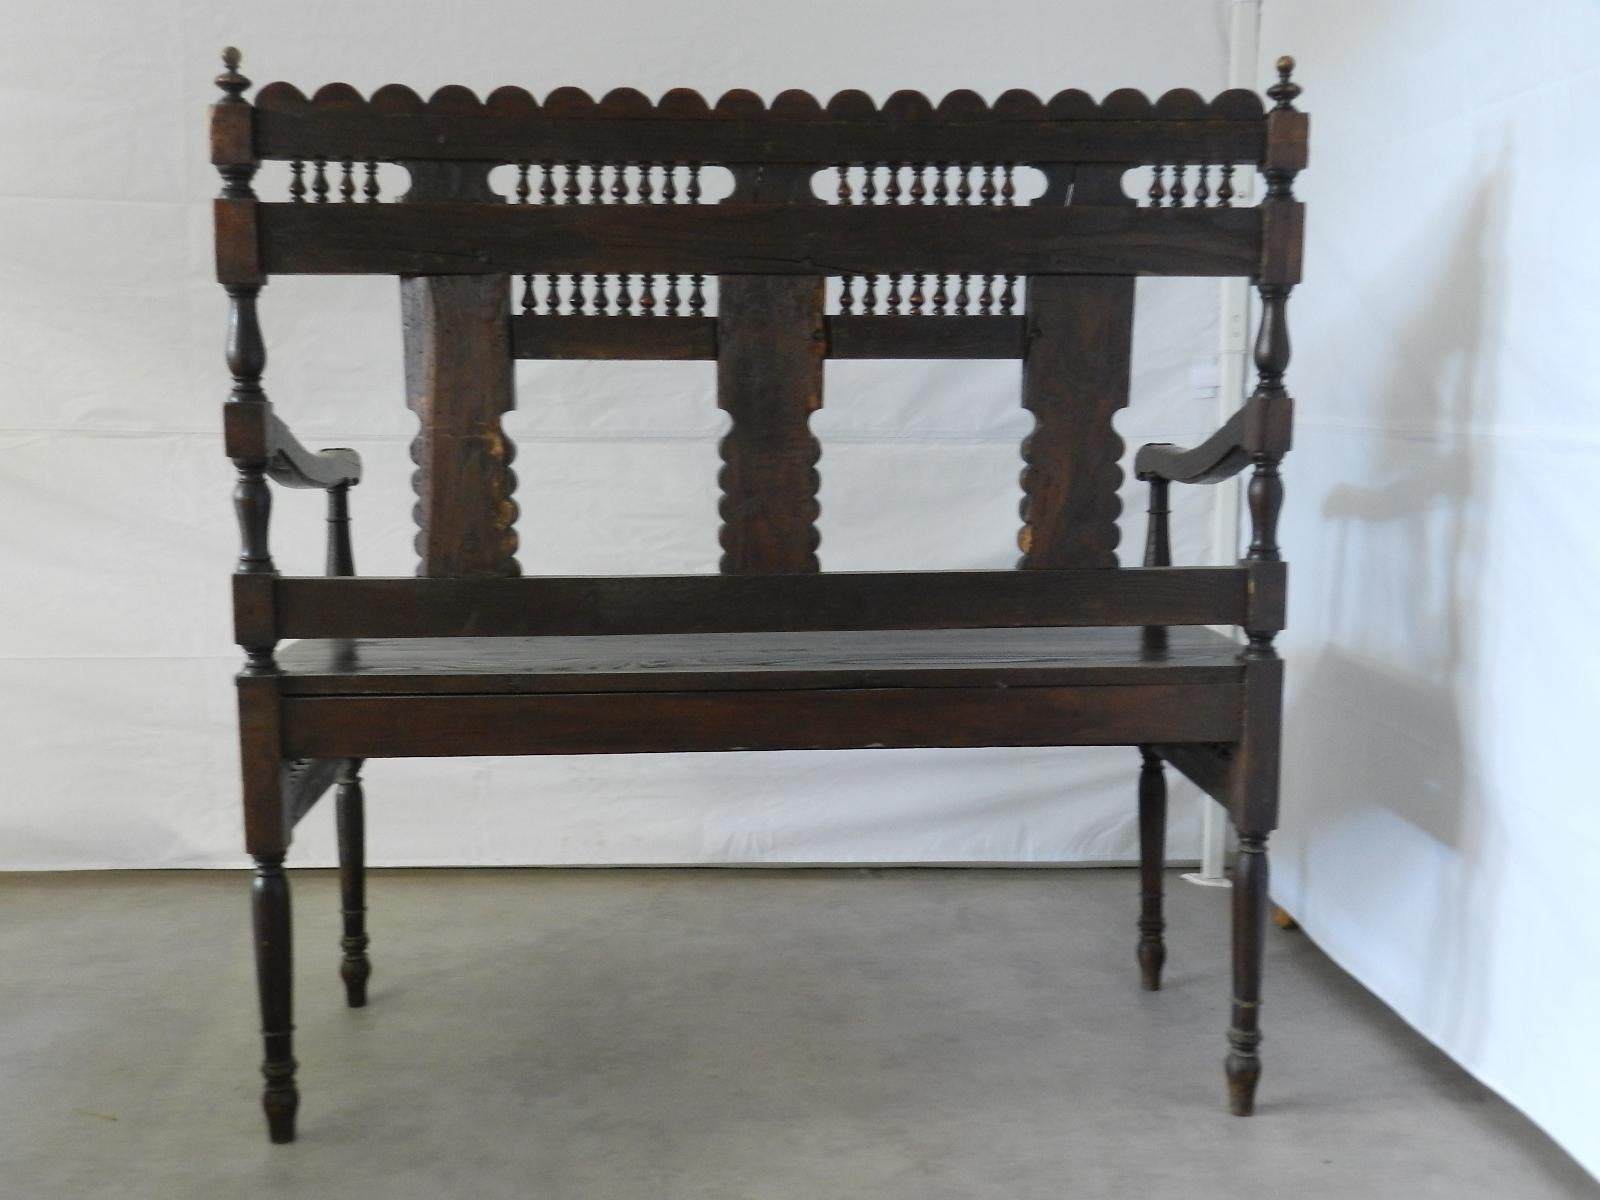 Carved Early 20th Century French Bench Provincial Chestnut Open-Arm Settle, circa 1910